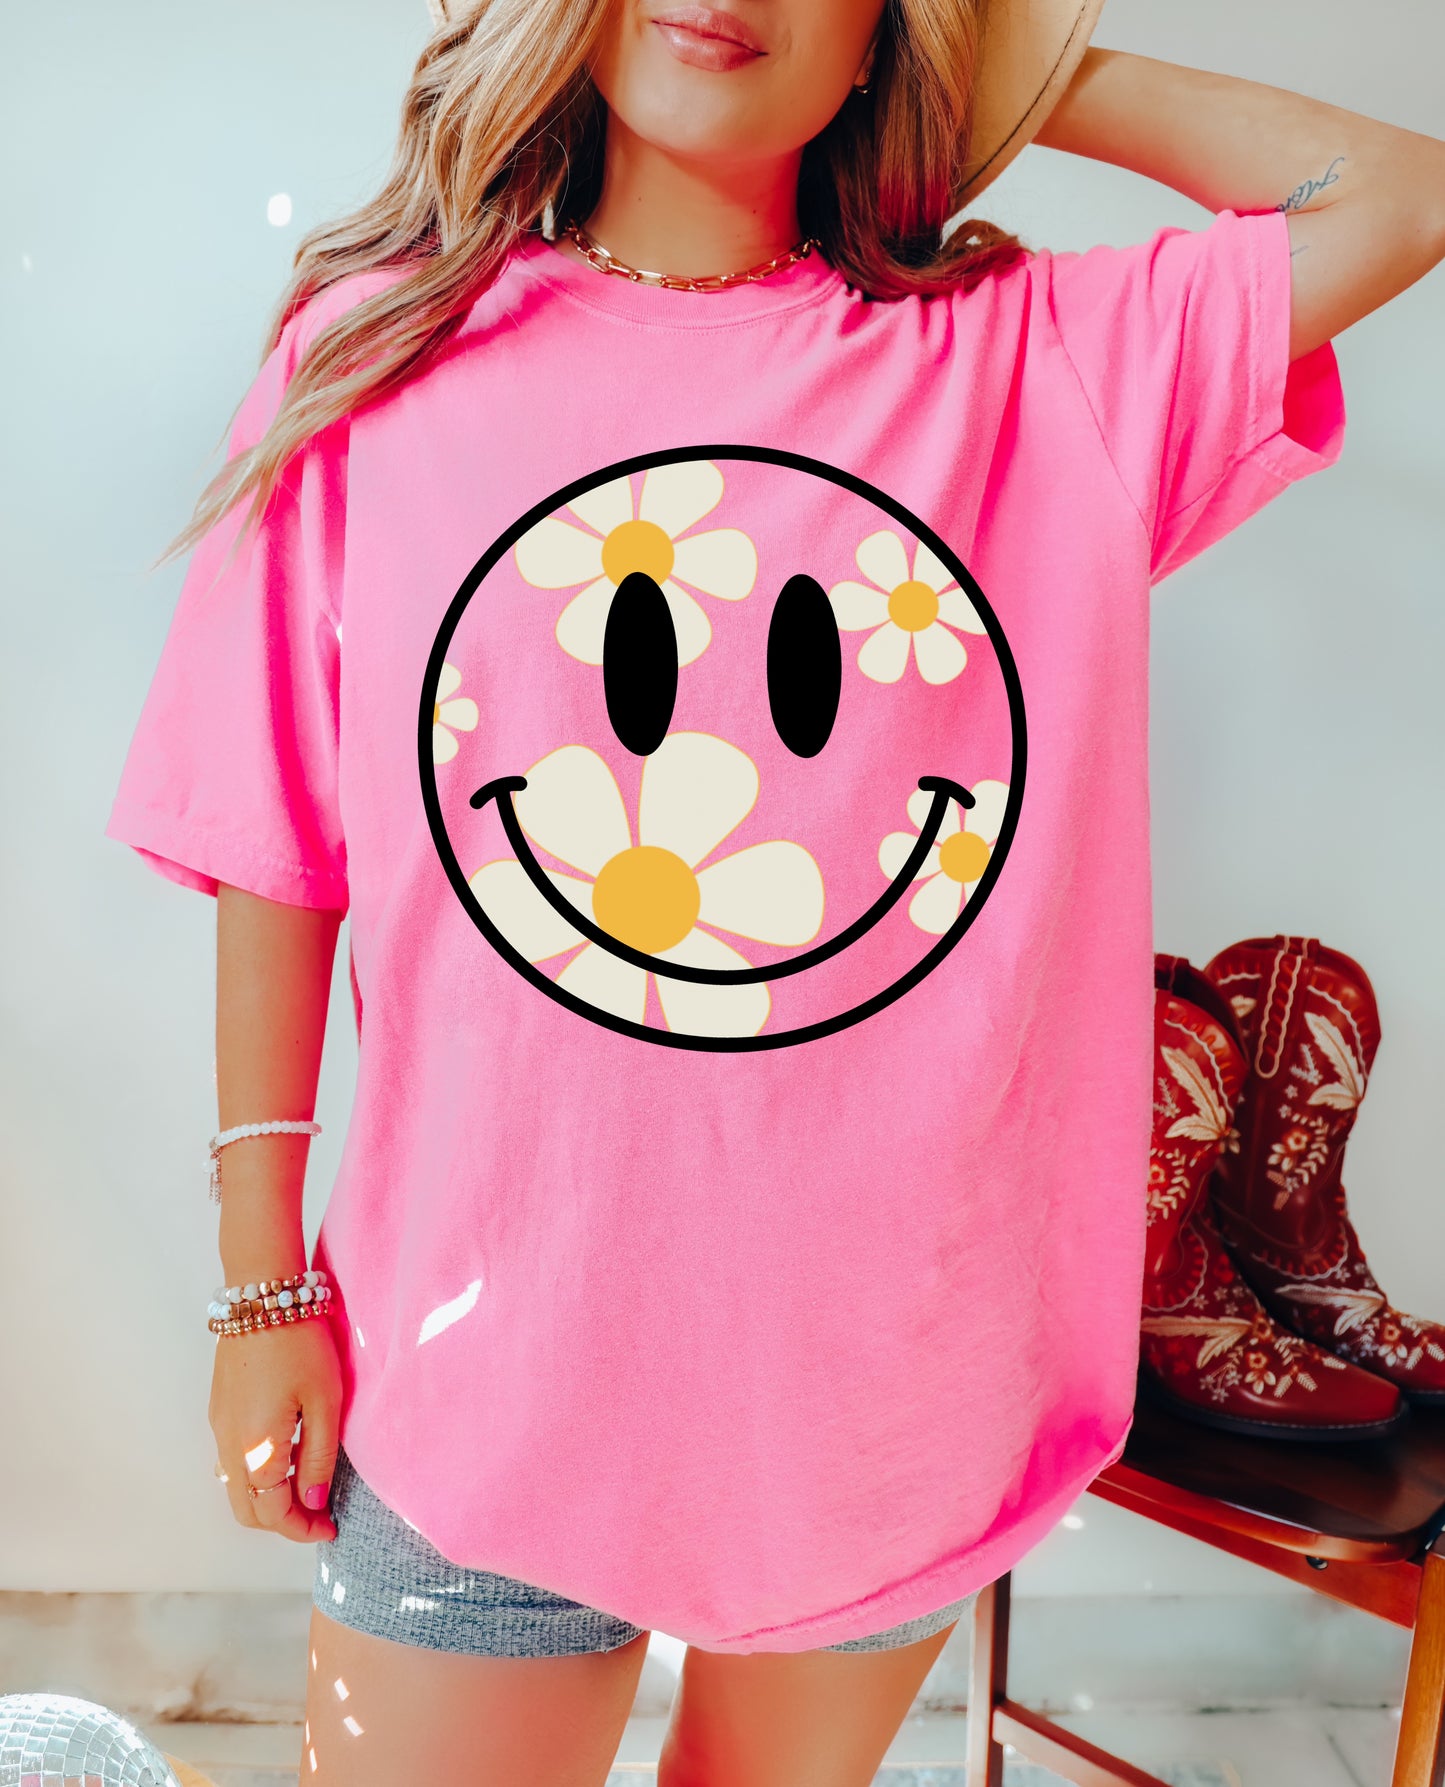 Peony Pink Comfort Colors Daisy Smiley Face Tee/ Quality Retro Tee / Summer Cover Ups